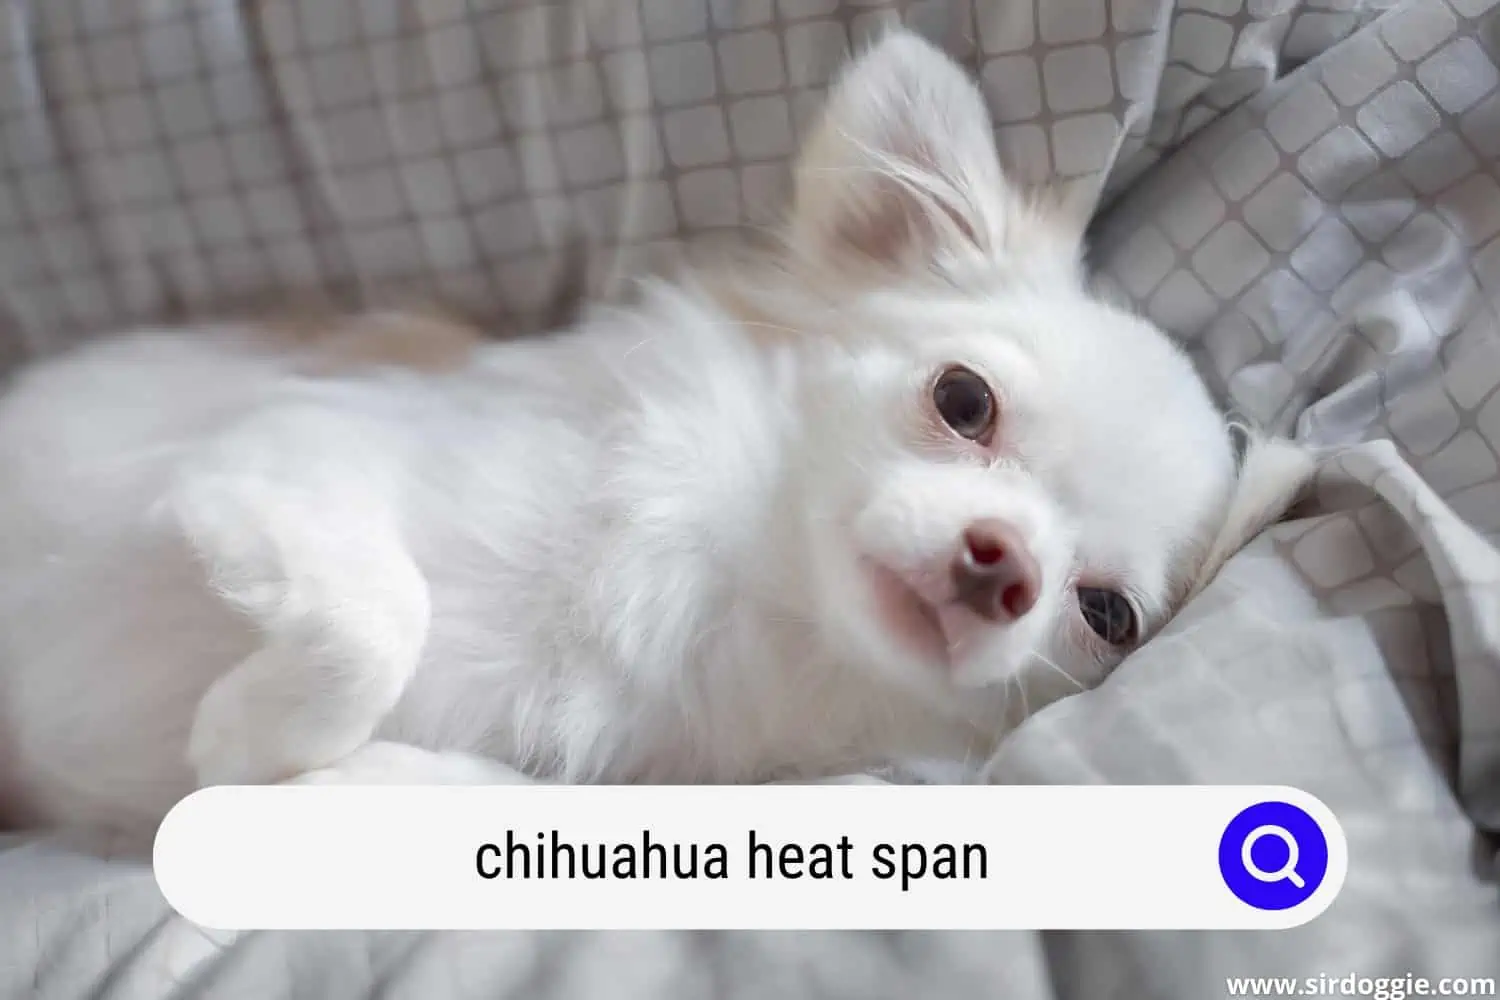 Chihuahua in heat, staying in couch